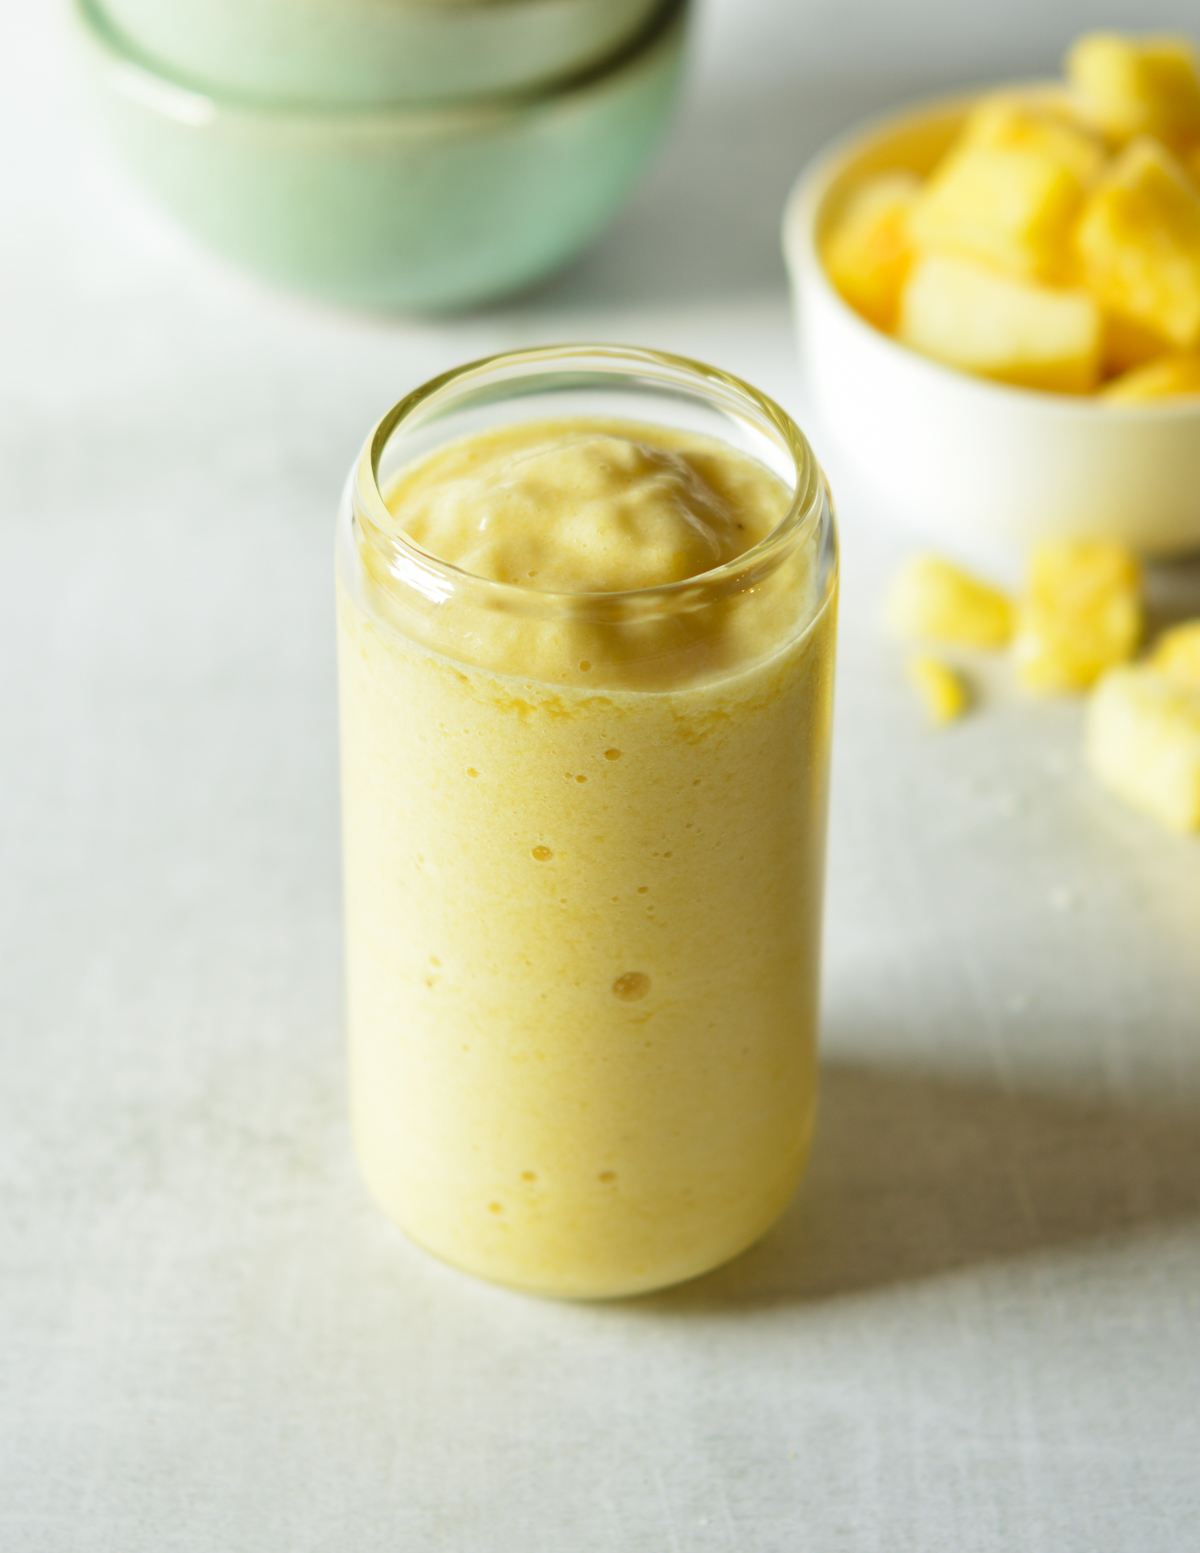 pineapple smoothie in a glass jar.